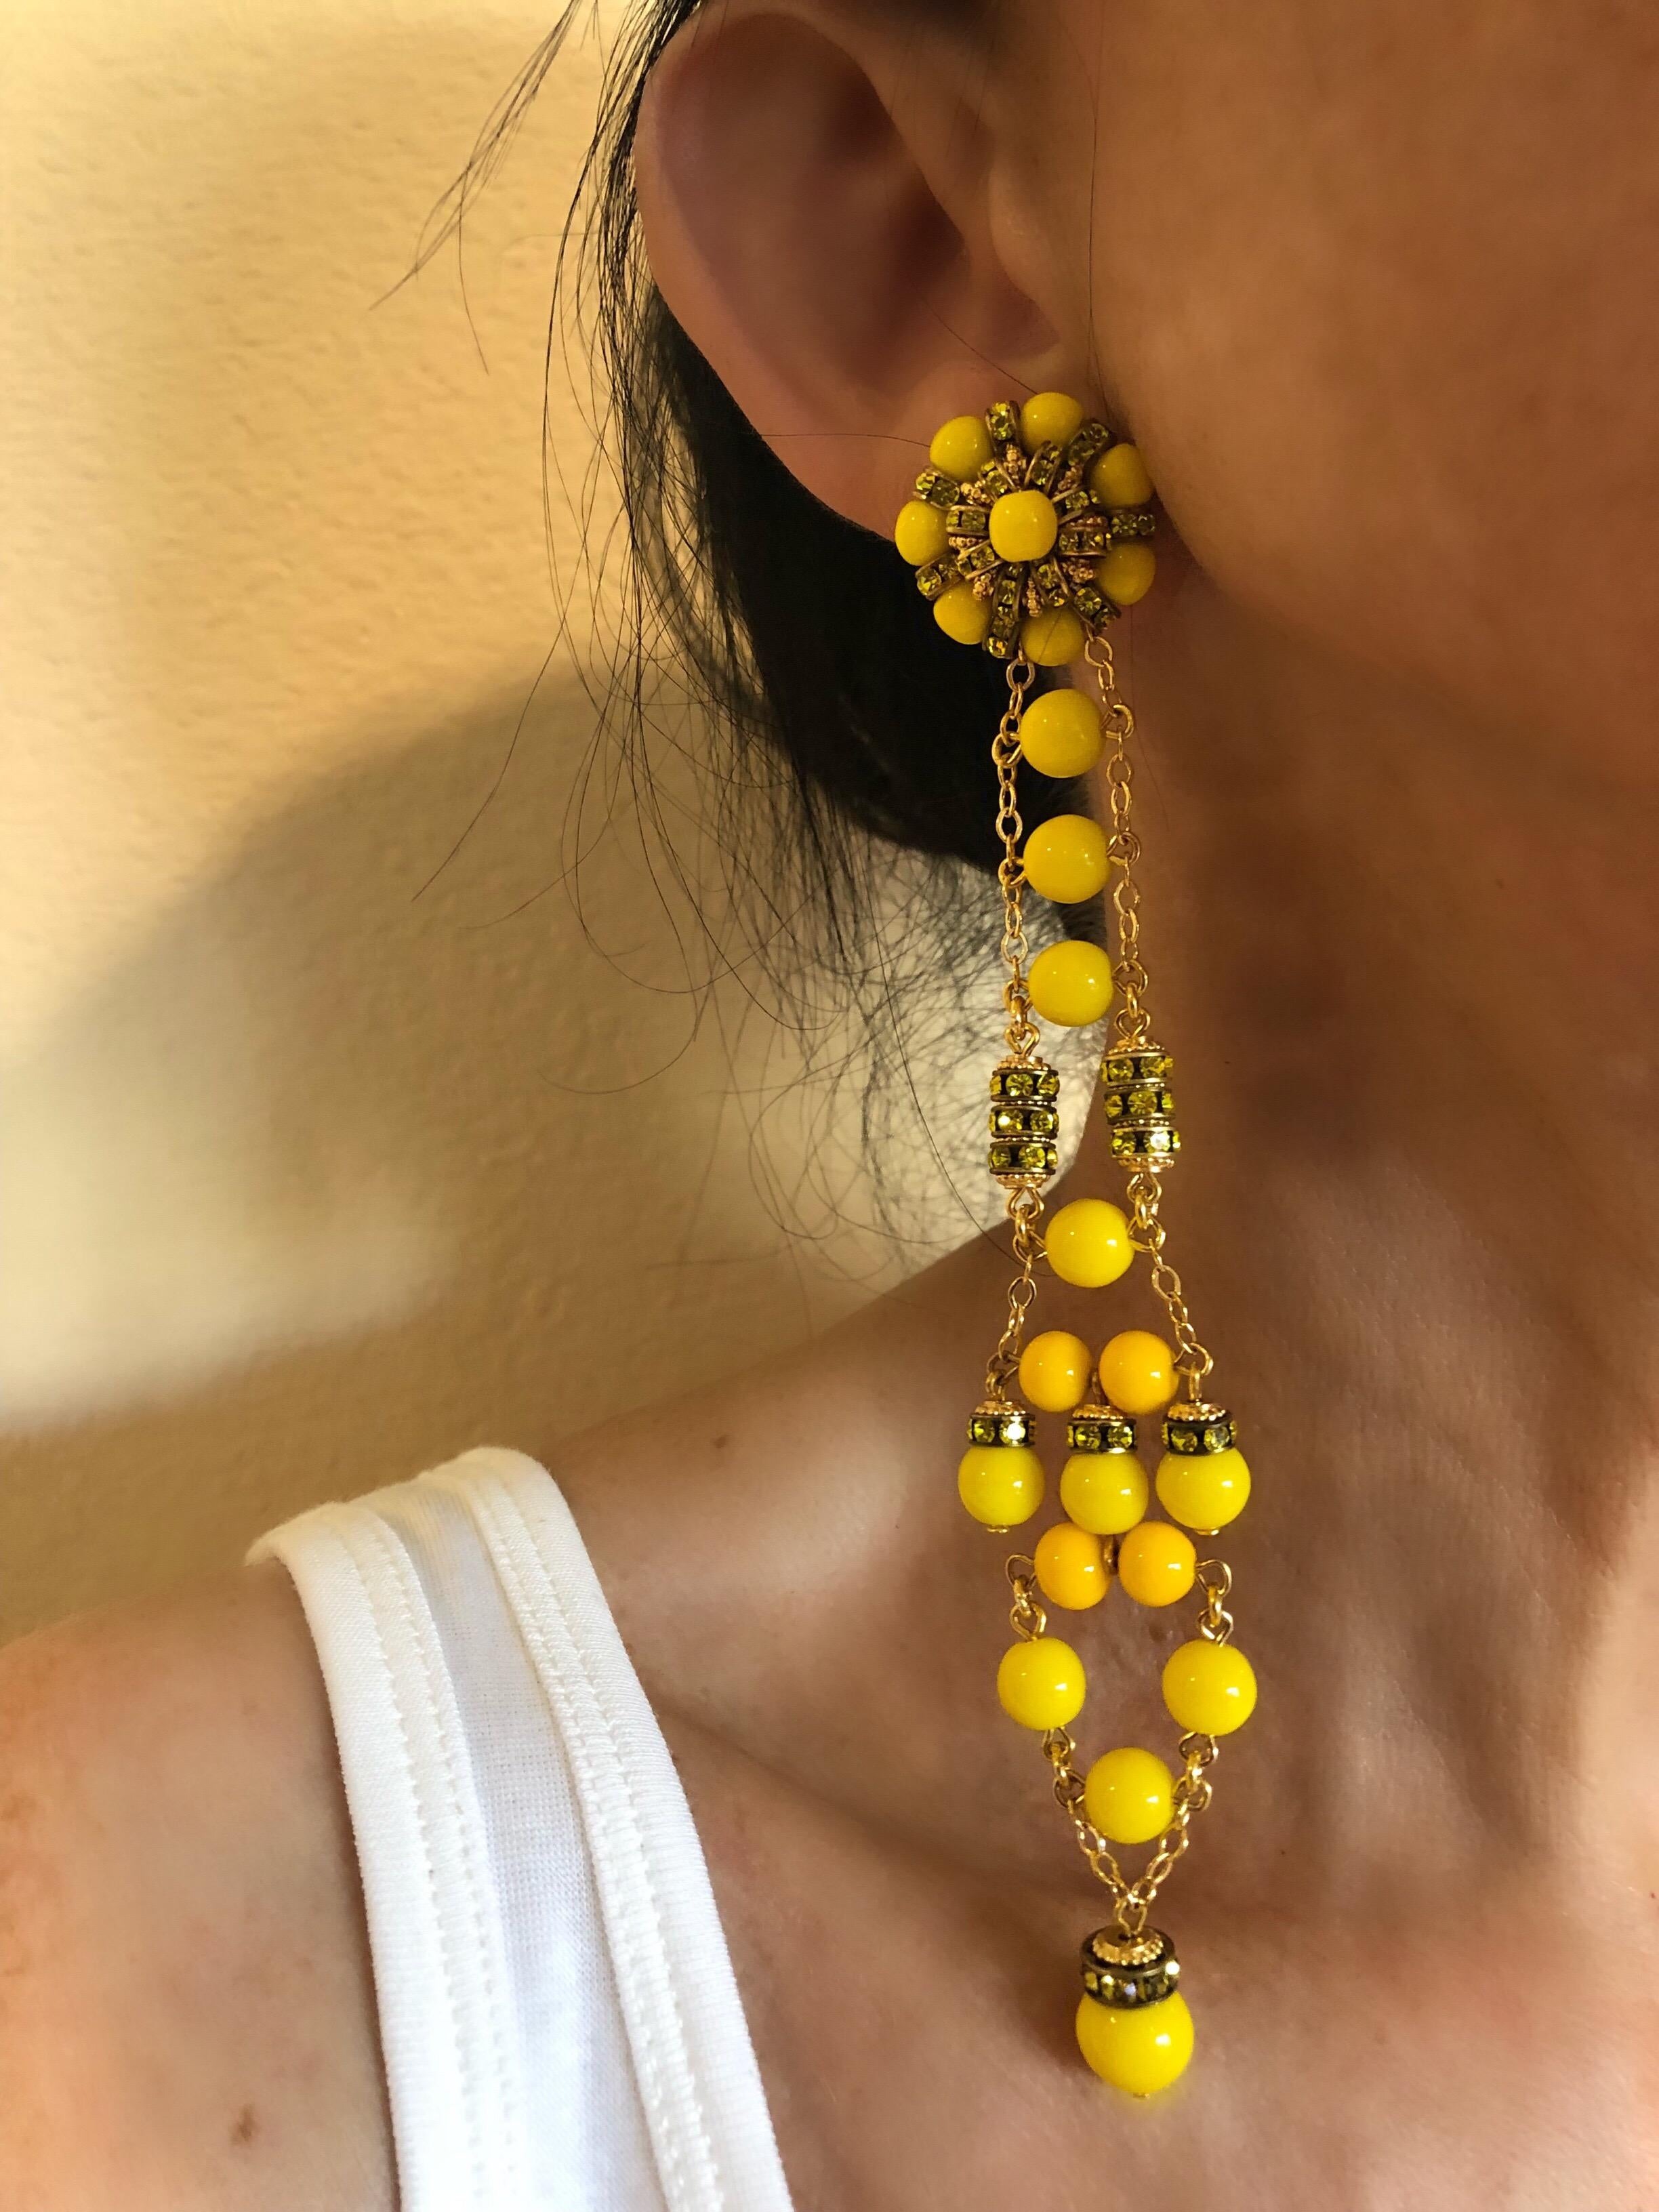 Can you say DRAMA? These dramatic French statement earrings were created by the Parisian house of Francoise Montague in Paris. Comprised of gold-tone chain the long linear earrings feature vintage yellow glass beads and yellow rondelle beads. The